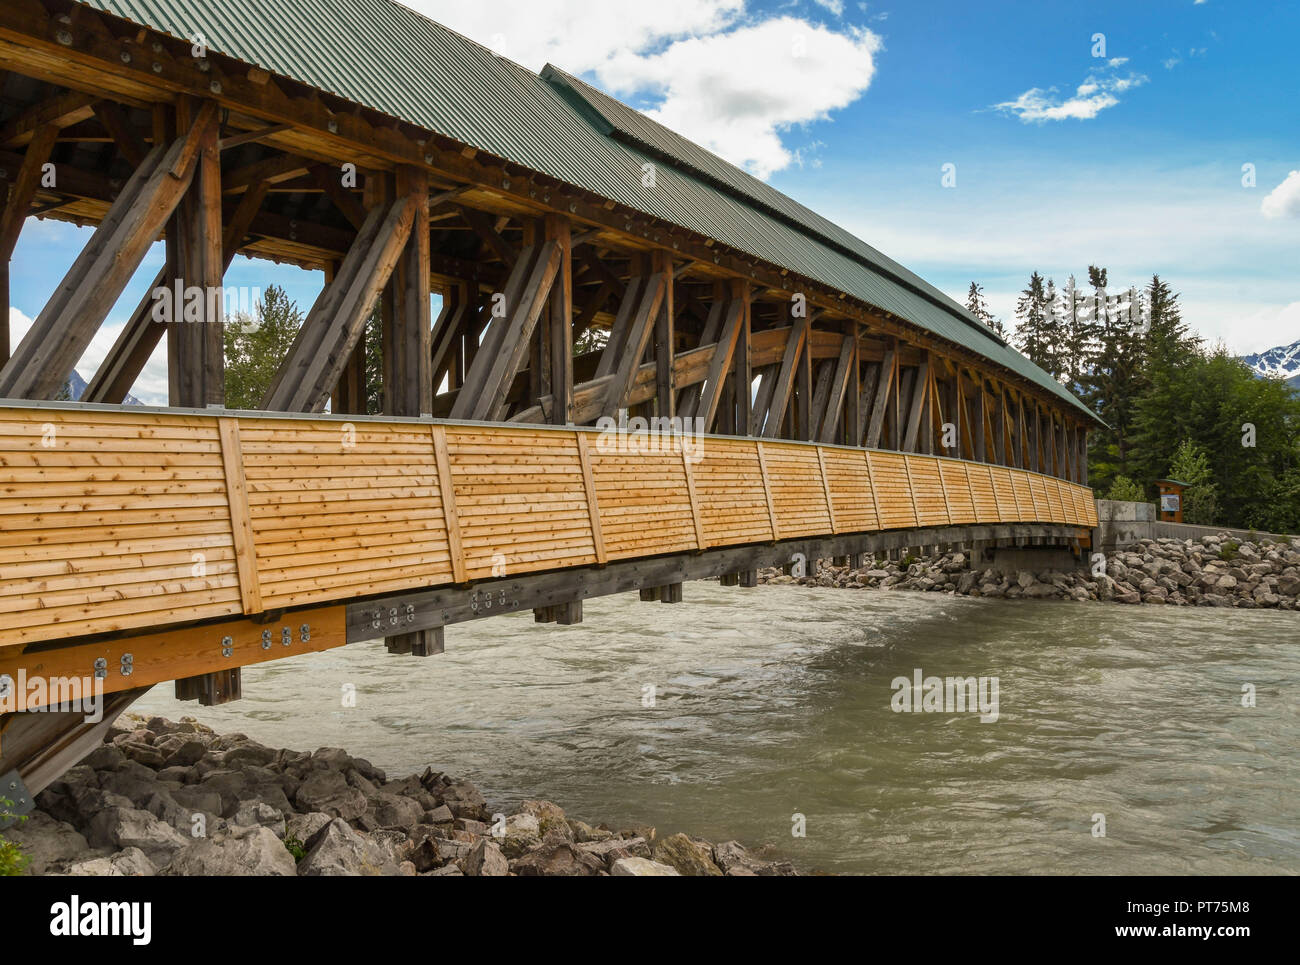 GOLDEN, BRITISH COLUMBIA, CANADA - JUNE 2018: The Kicking Horse pedestrian bridge over the river of the same name in Golden, BC. Stock Photo